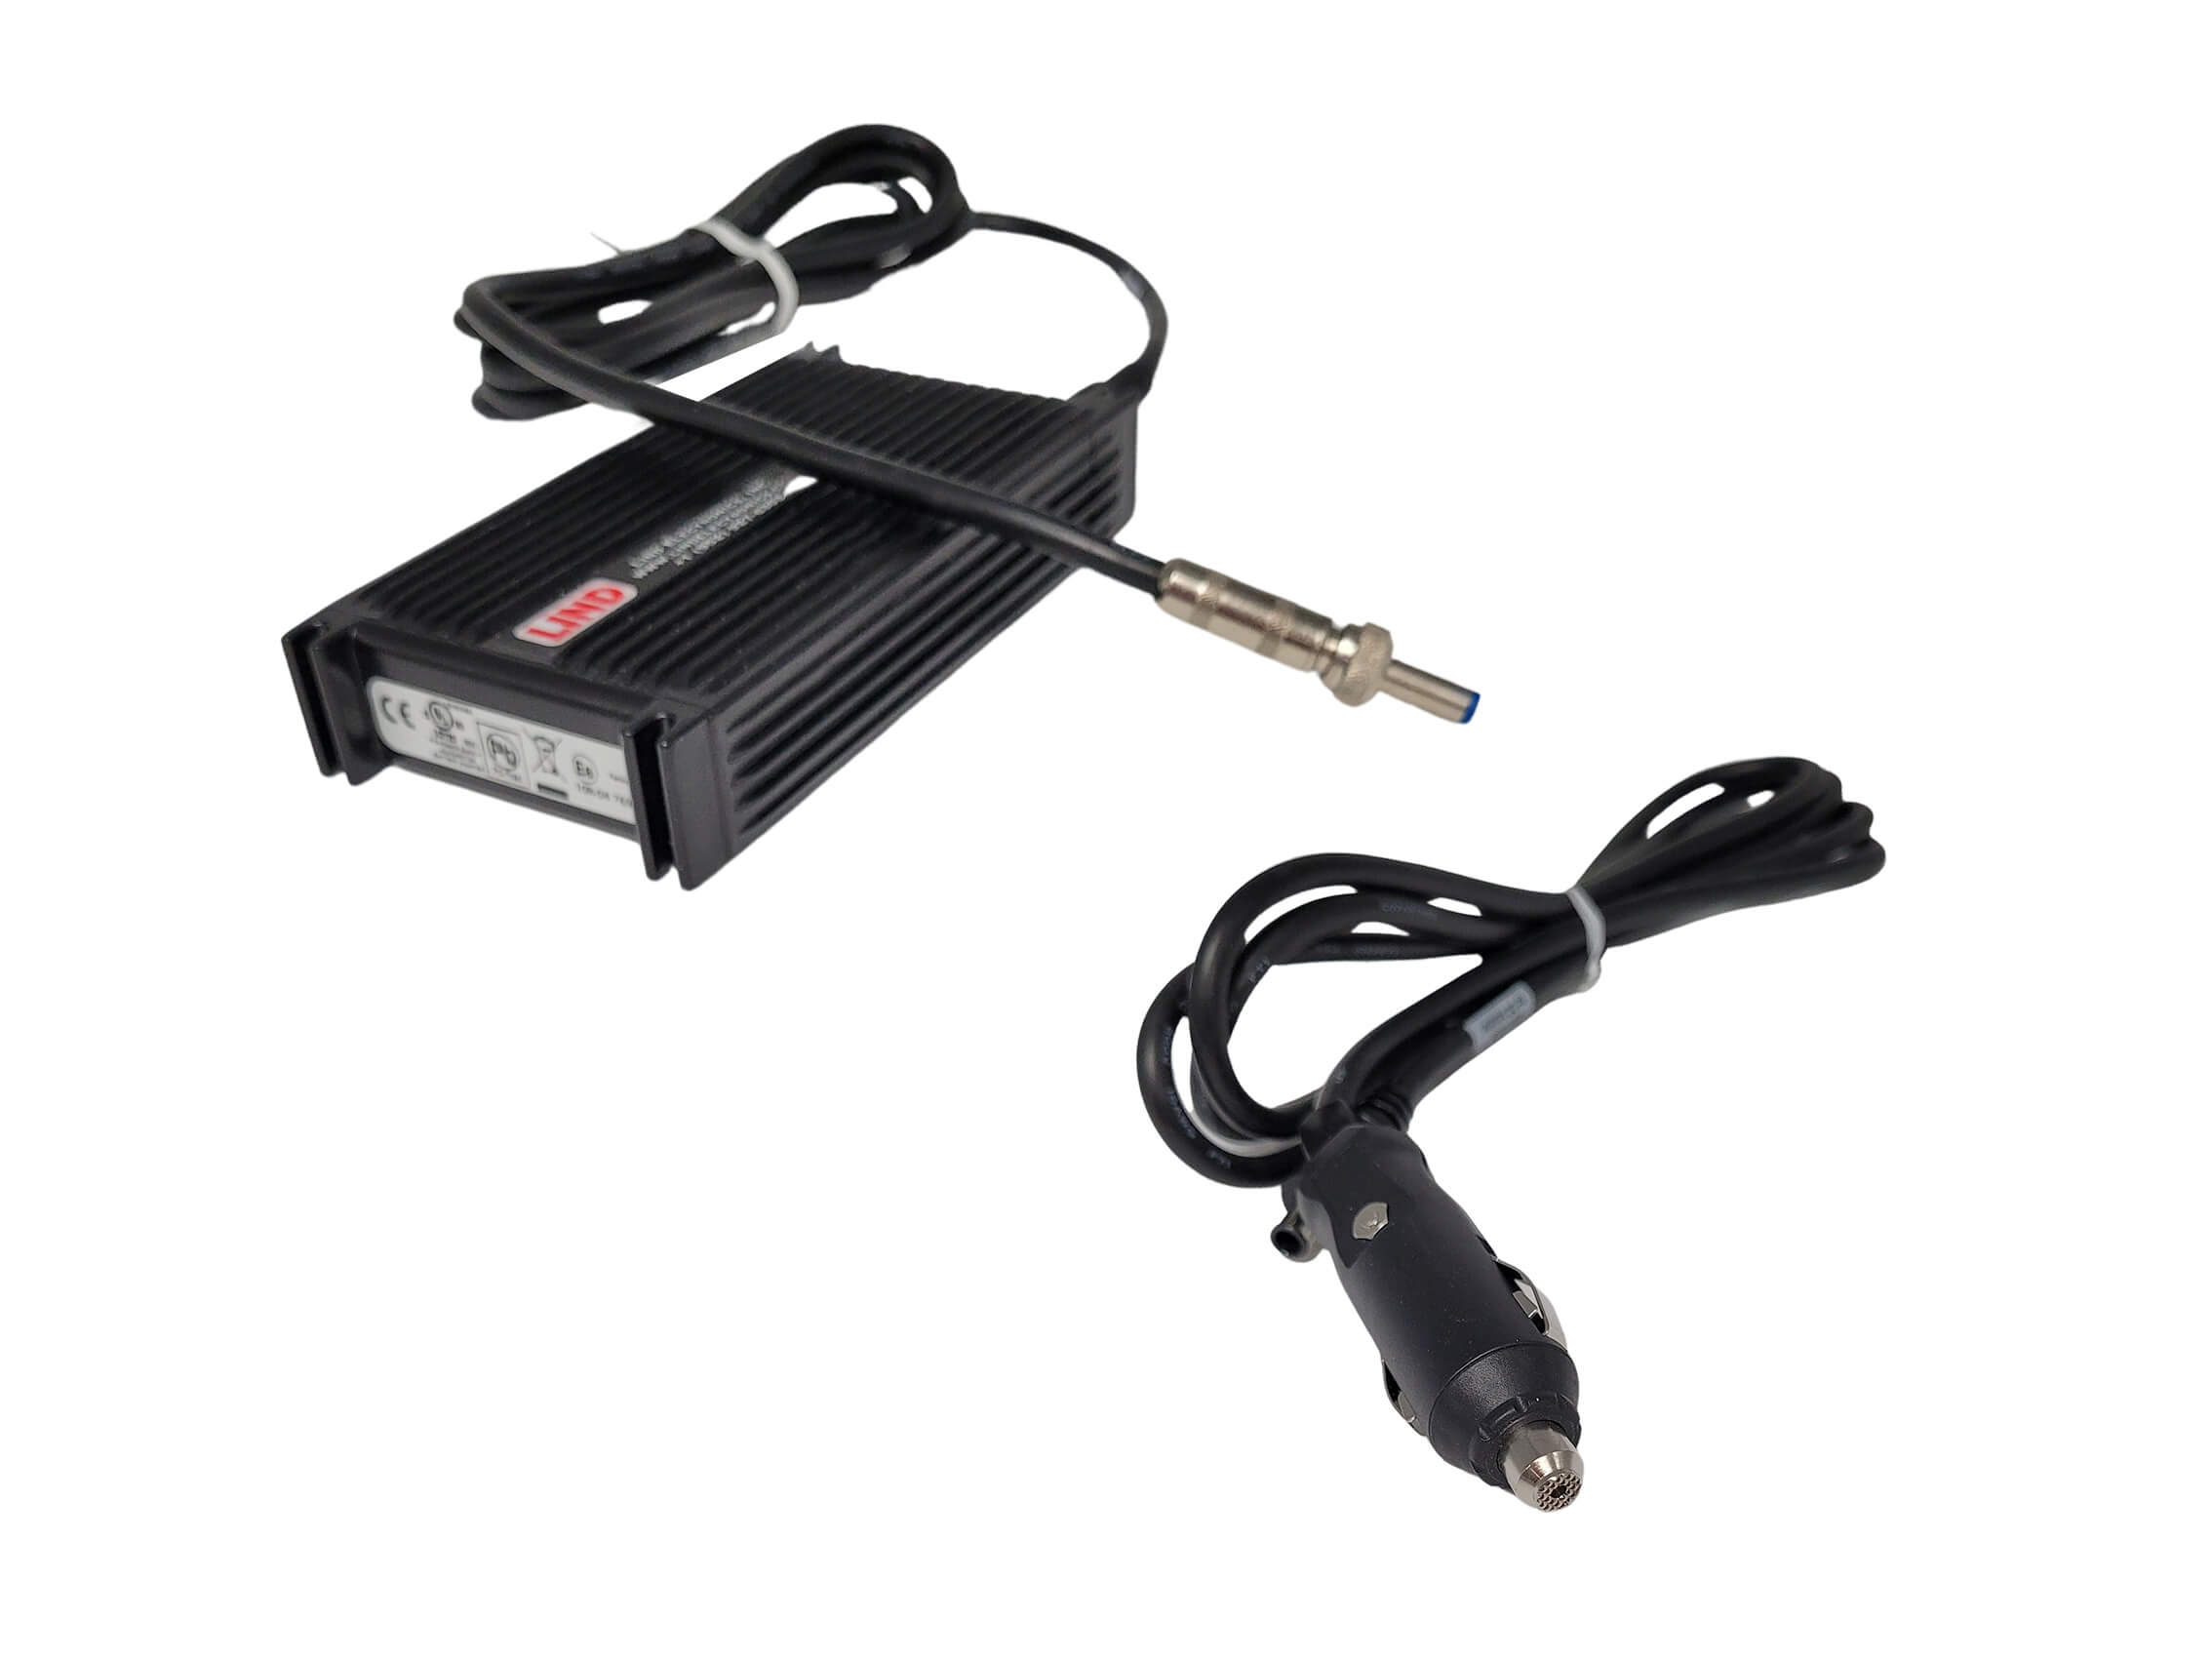 Power Supply With Switchcraft Connector For DS-DELL-904/904-4, DS-DELL-907/907-4, DS-DELL-1104/1107 & DS-TAB-301 Docking Stations